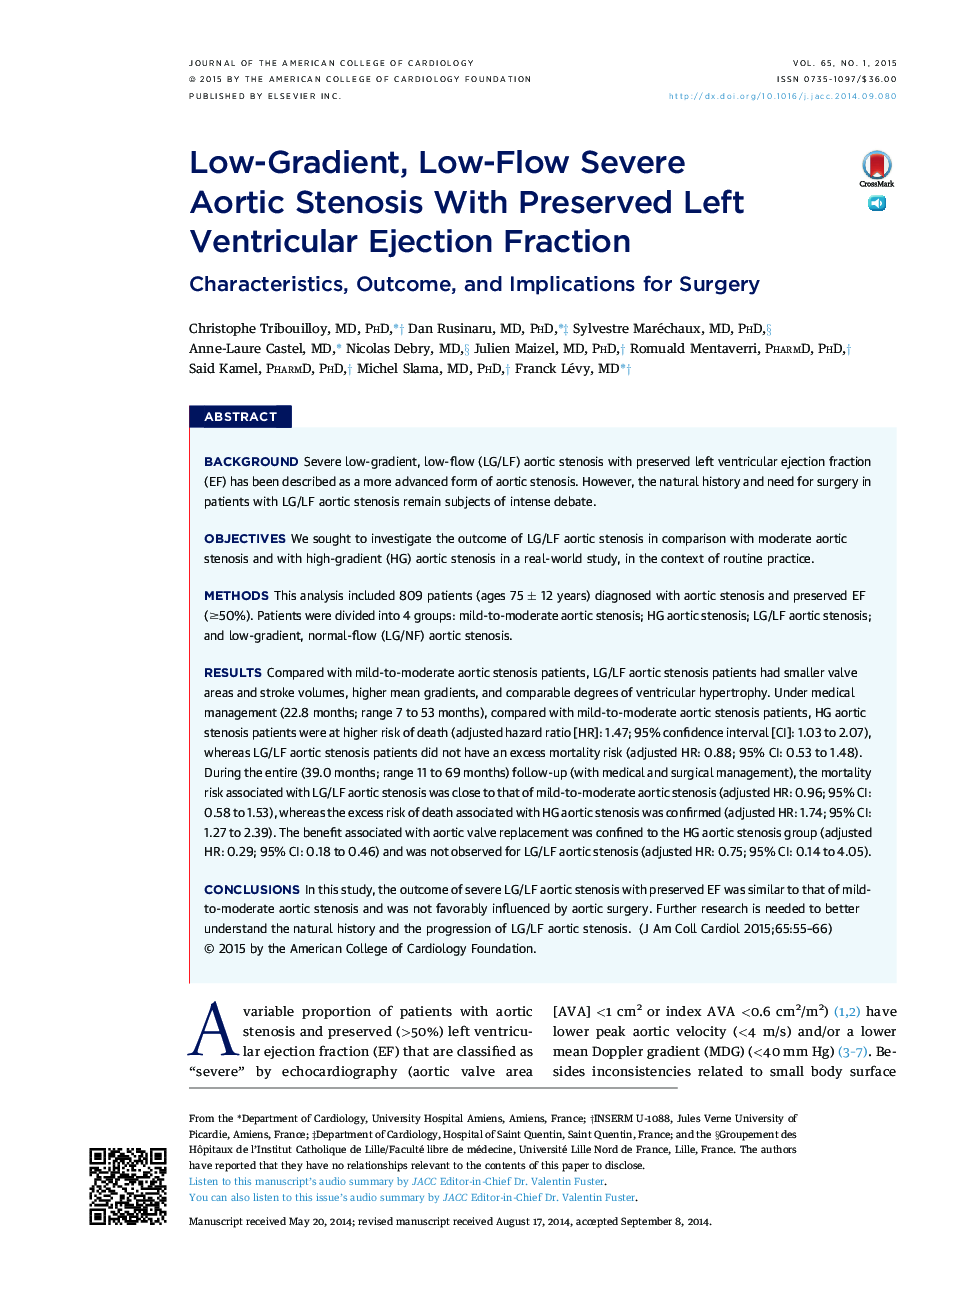 Low-Gradient, Low-Flow Severe AorticÂ Stenosis WithÂ Preserved Left Ventricular EjectionÂ Fraction: Characteristics, Outcome, and Implications for Surgery